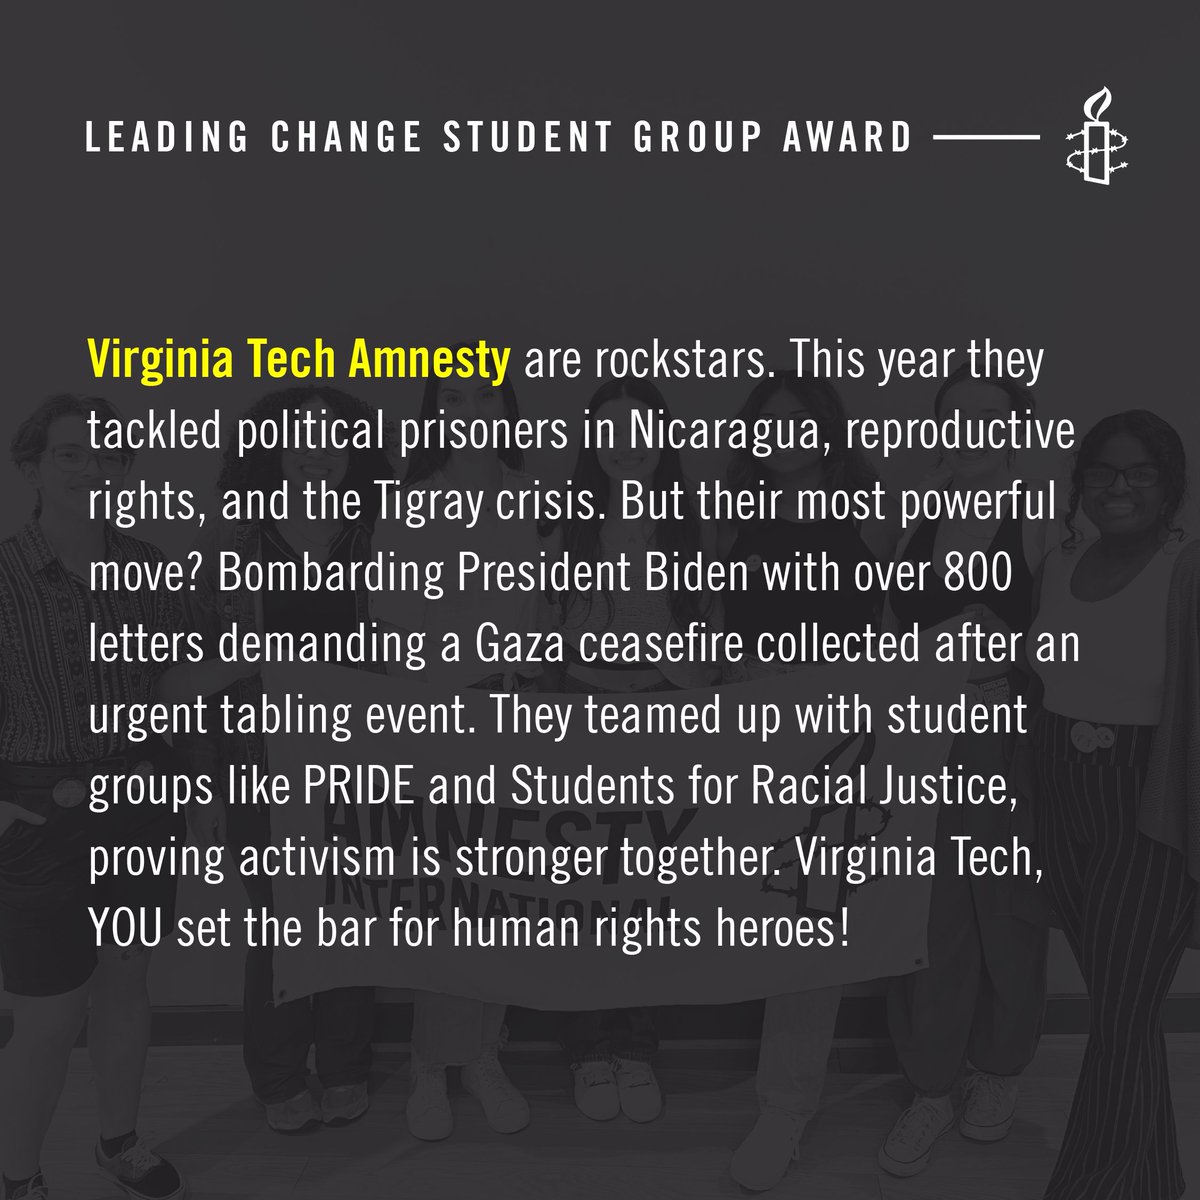 We're celebrating #VolunteerMonth by highlighting some of our amazing volunteer leaders!

Virginia Tech Amnesty bombarded President Biden with 800+ letters demanding a Gaza ceasefire collected after an urgent tabling event. Virginia Tech, YOU set the bar for human rights heroes!